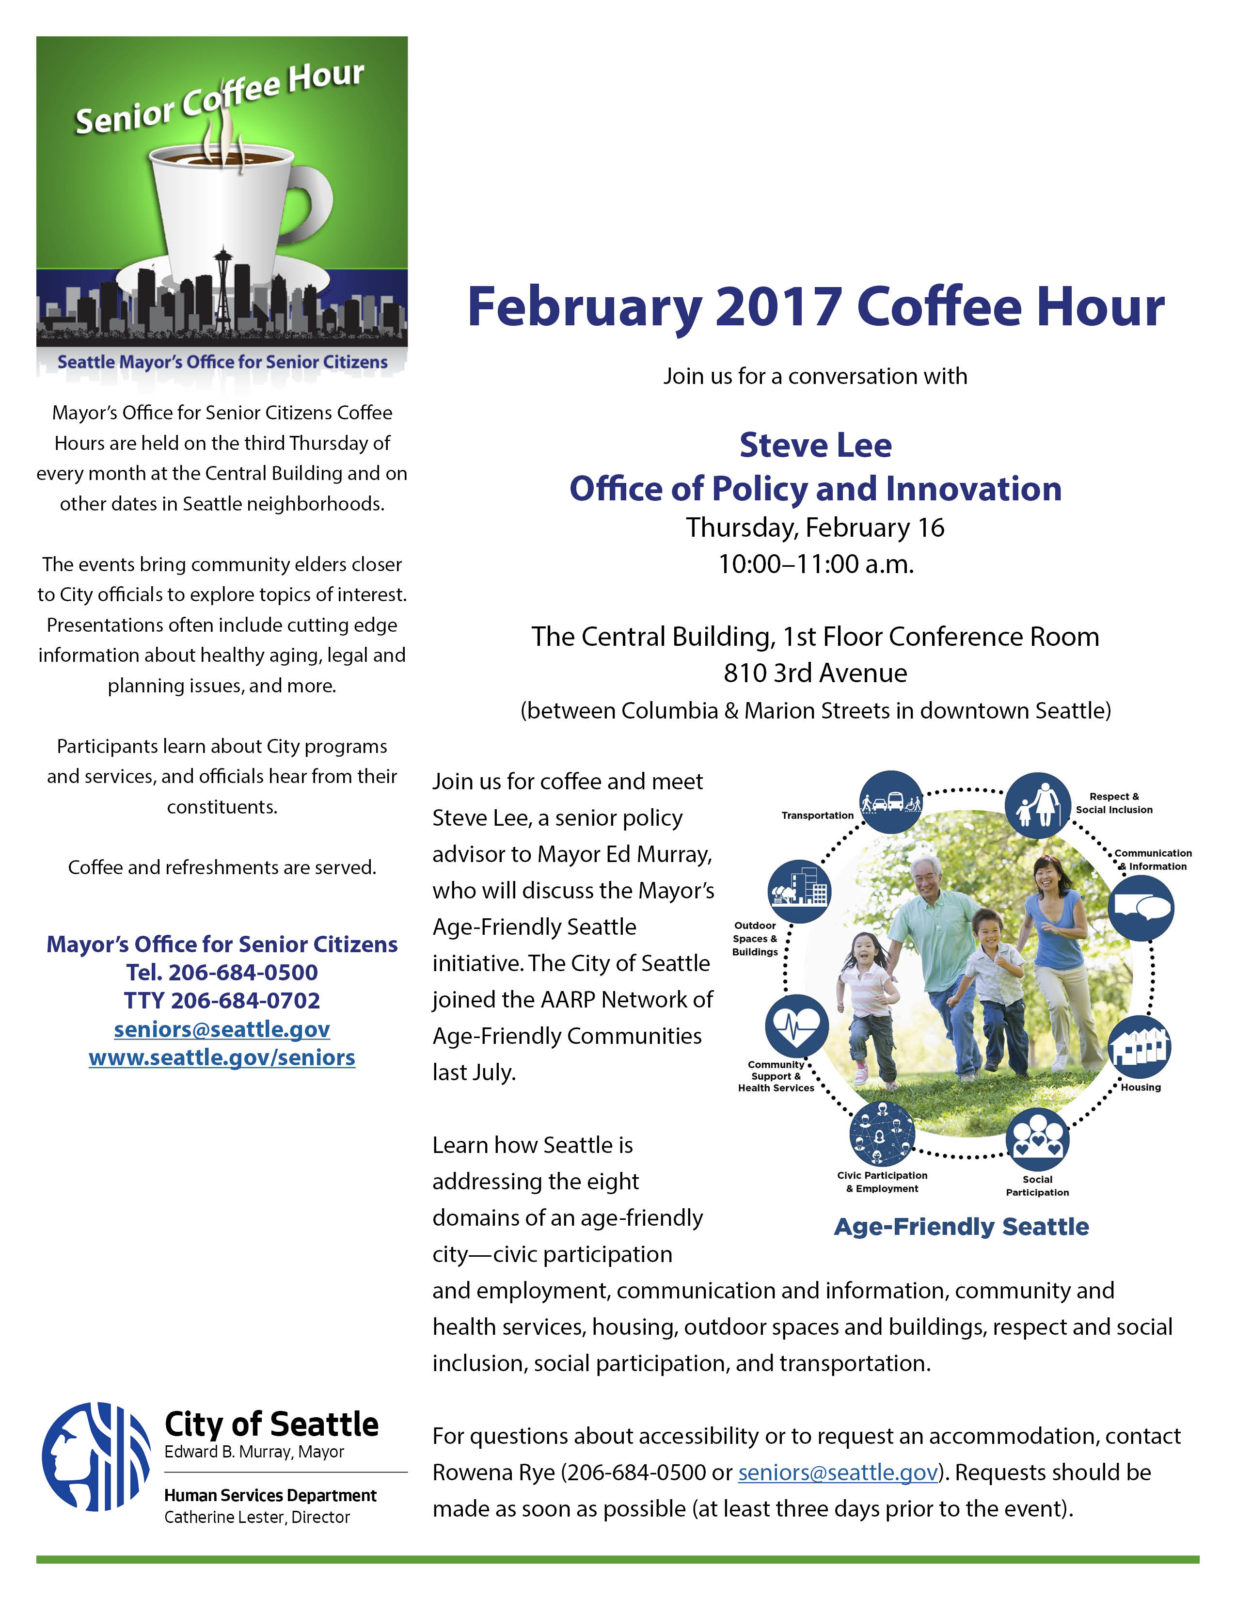 Image of Senior Coffee Hour flyer for Thursday, February 16, presentation by Steve Lee about Age-Friendly Seattle.